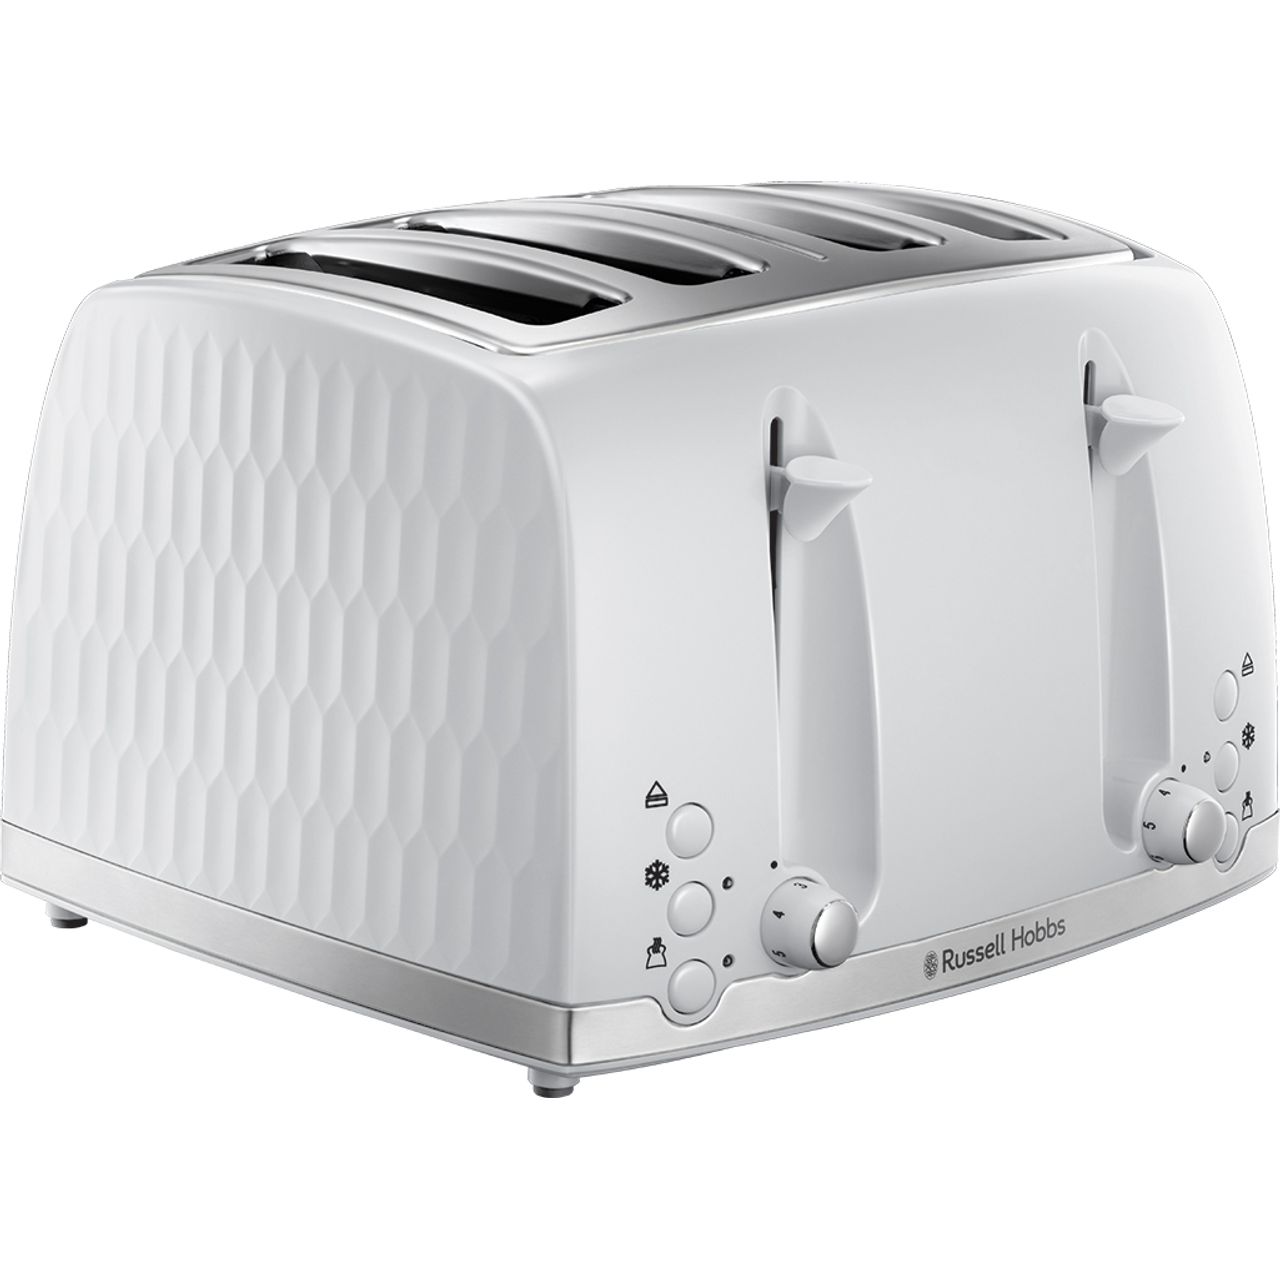 Russell Hobbs Honeycomb 26070 4 Slice Toaster Review